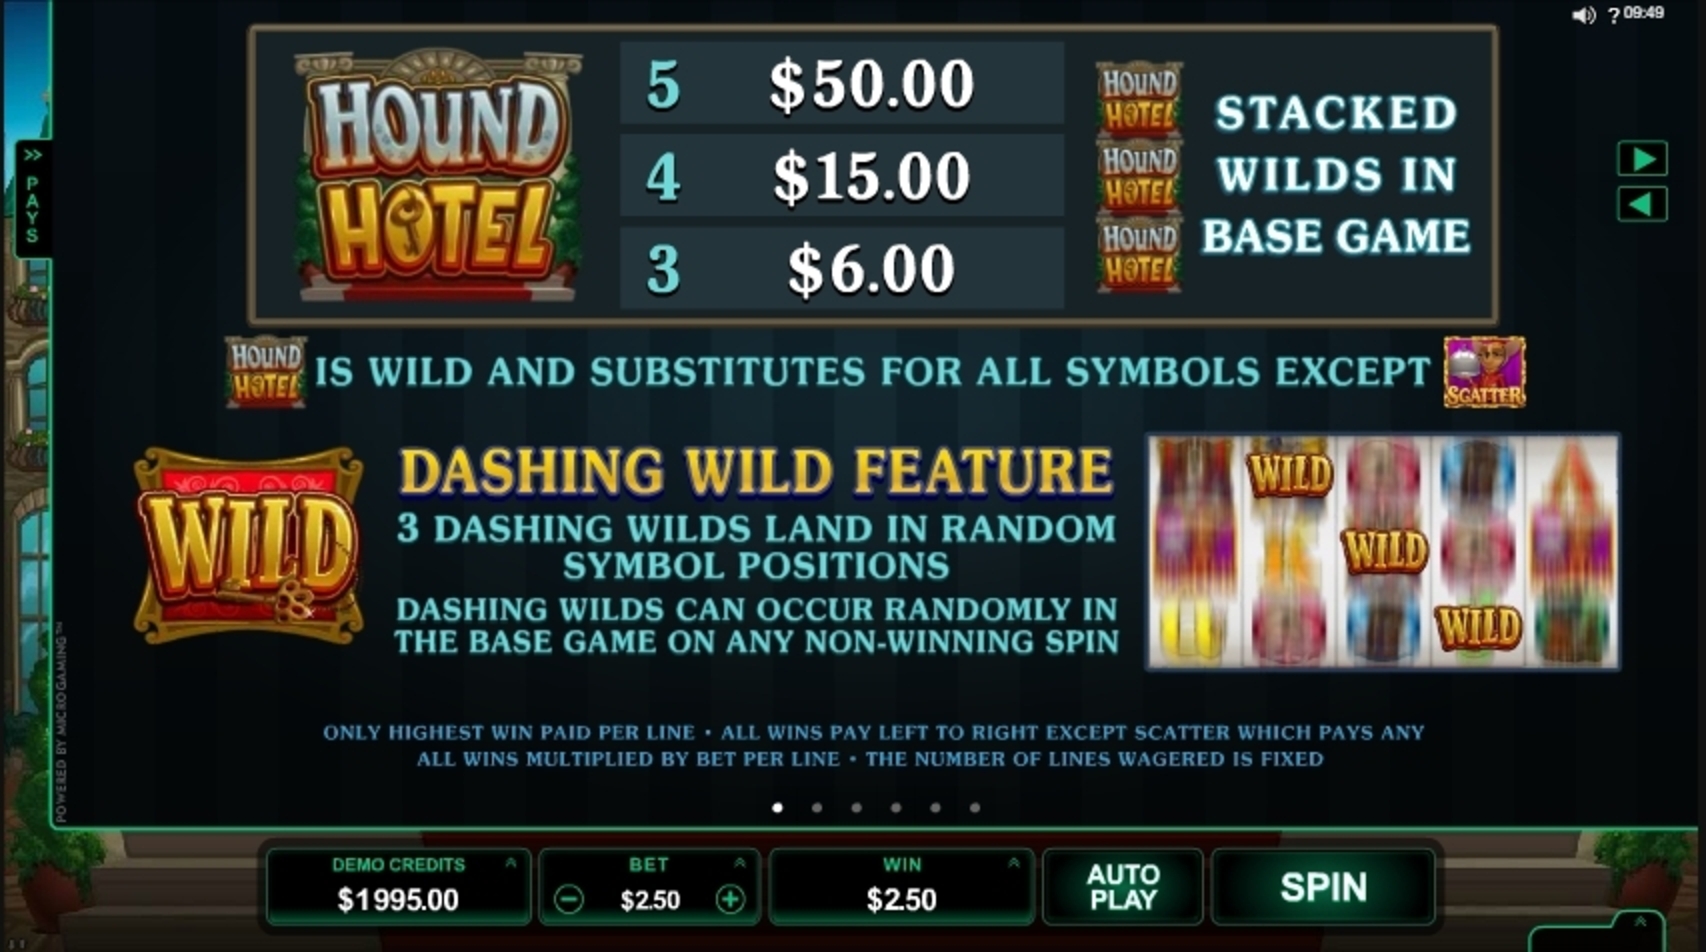 Info of Hound Hotel Slot Game by Microgaming